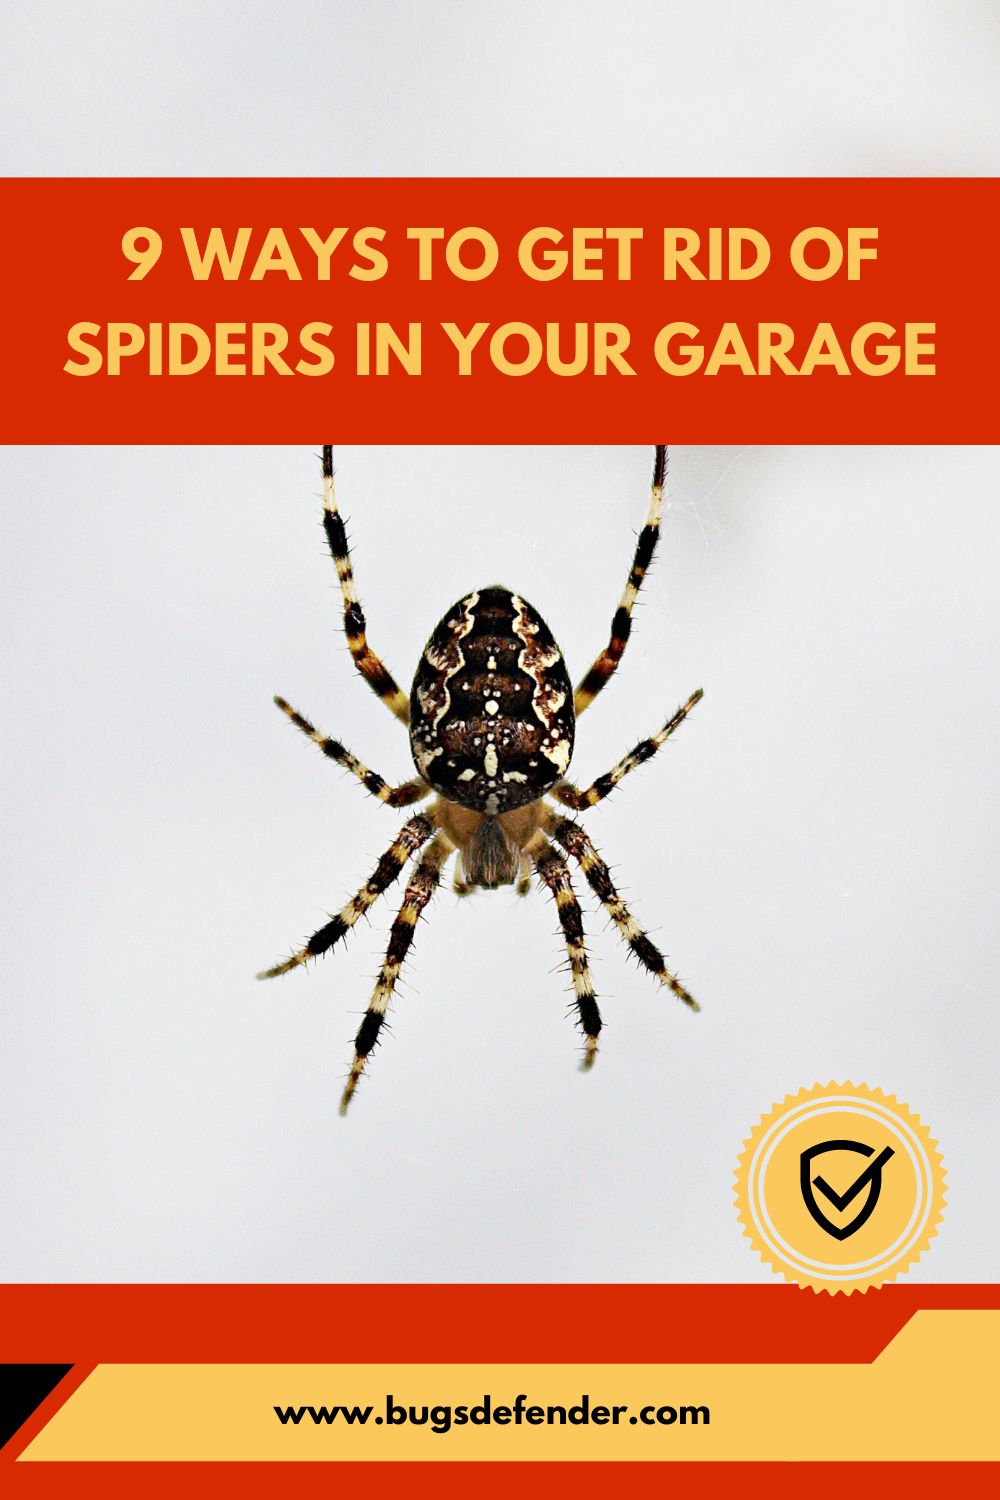 9 Ways to Get Rid of Spiders in Your Garage pin 1